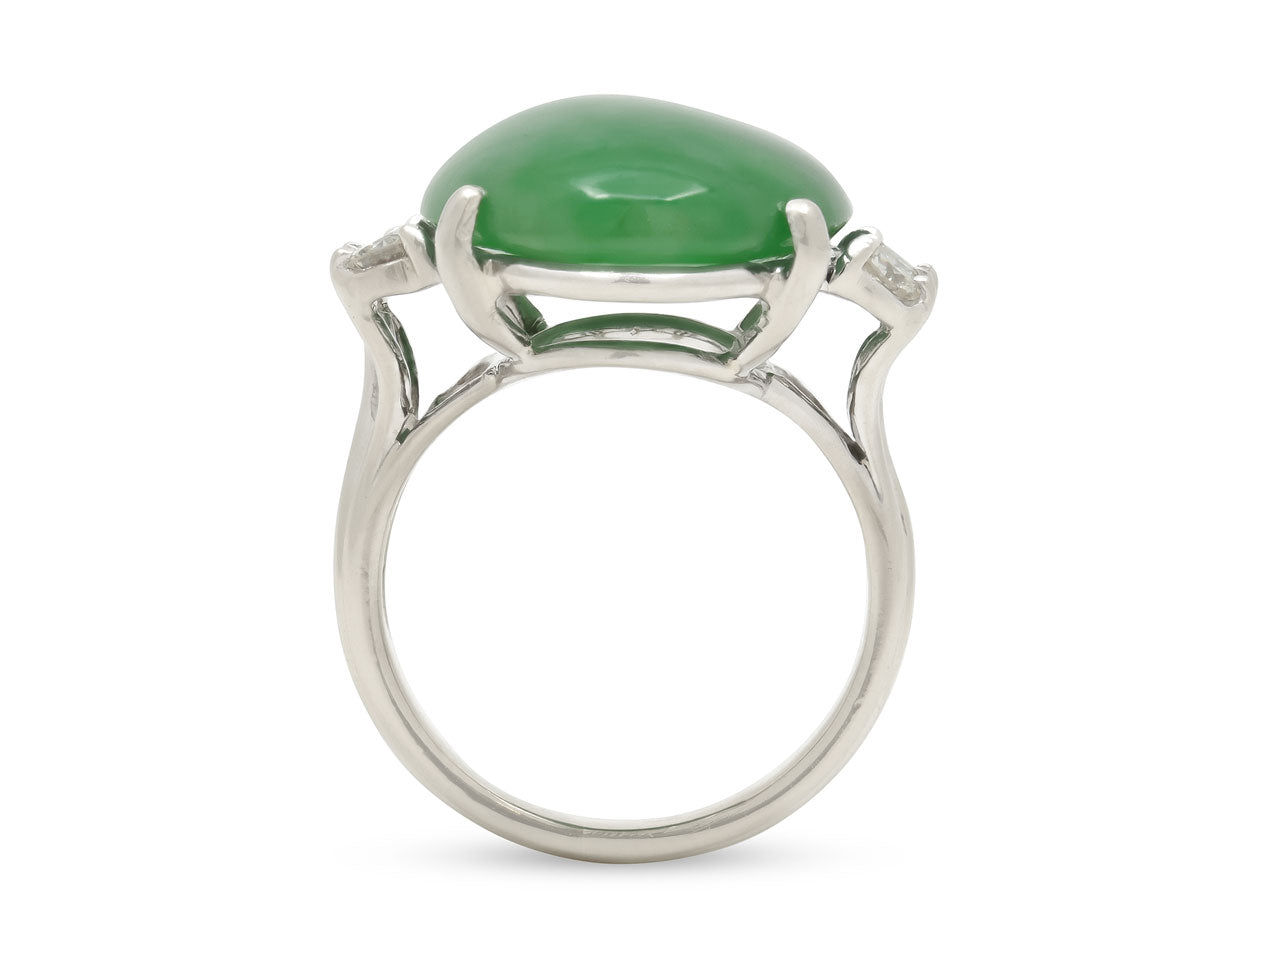 Jade and Diamond Ring in 14K White Gold